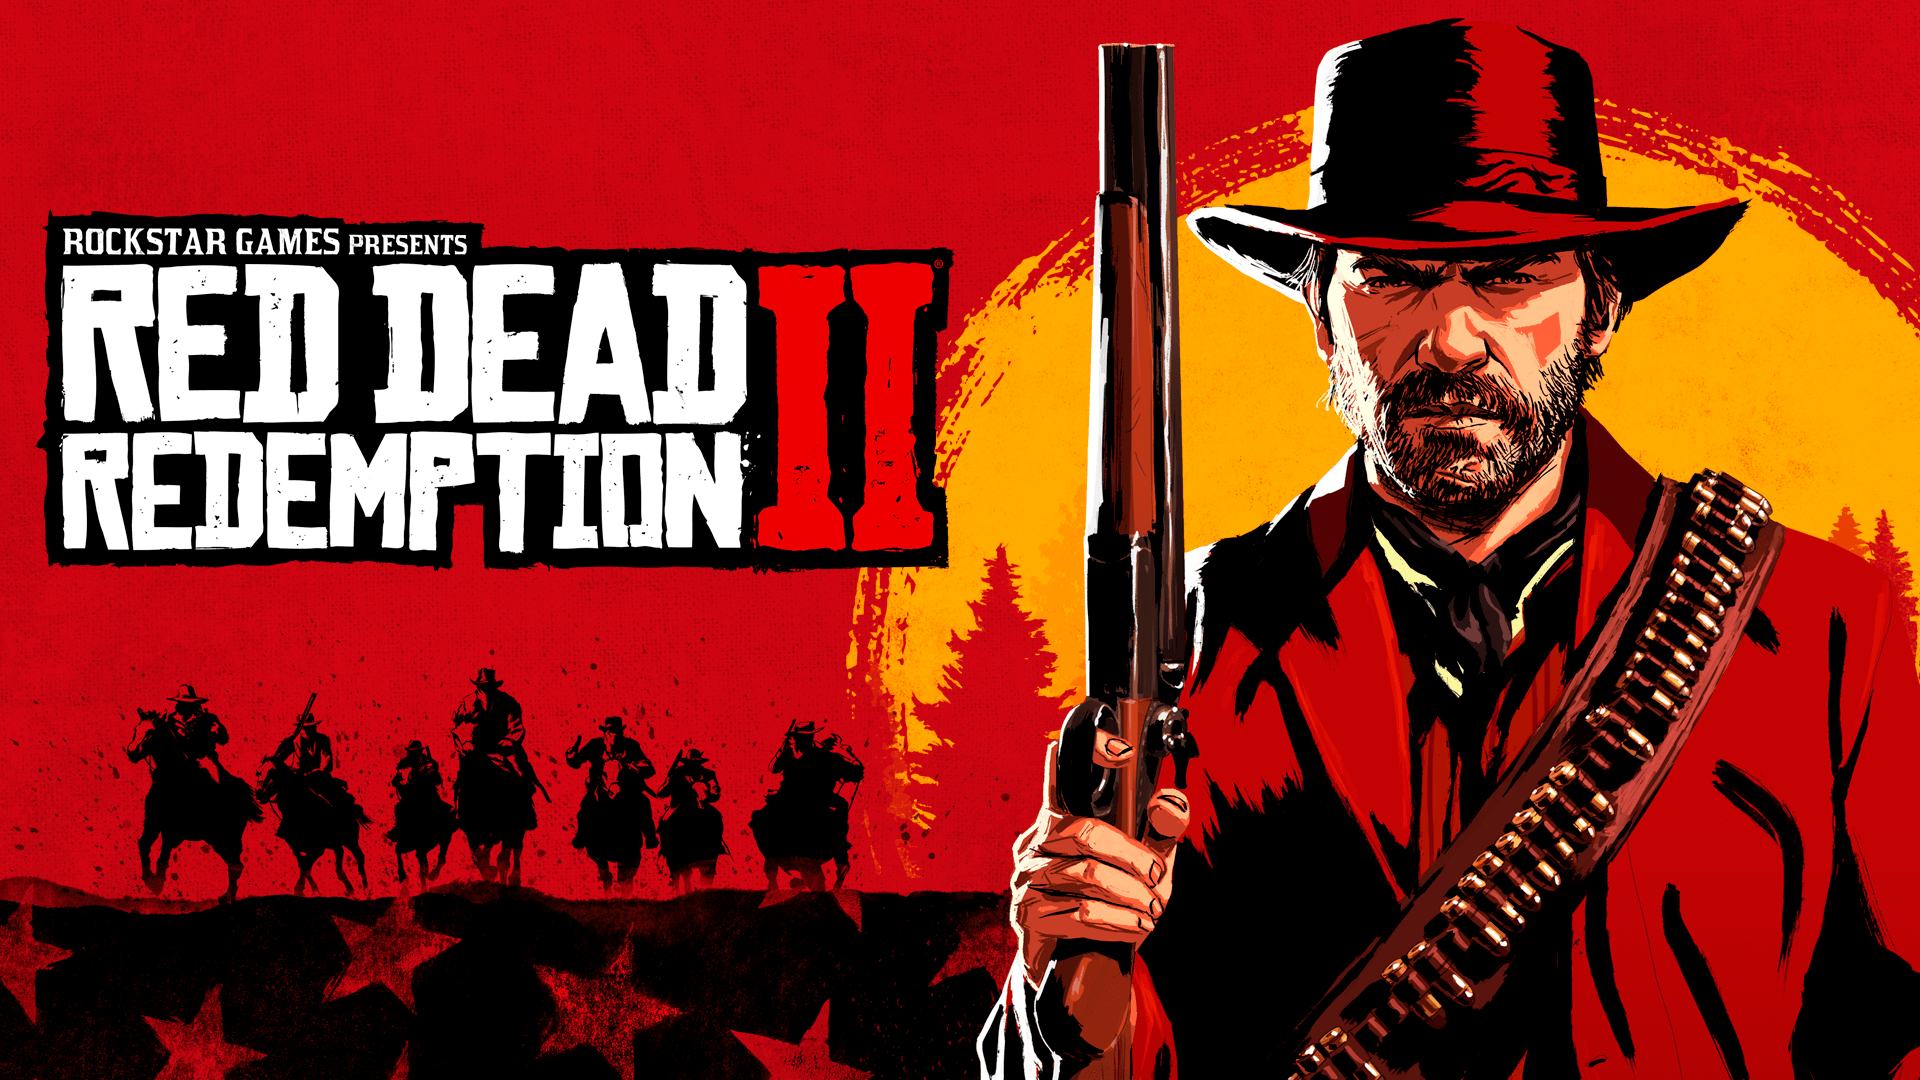 Red Dead Redemption 2 Update Version 1.12 New Patch Notes PC PS4 Xbox One Full Details Here 2019